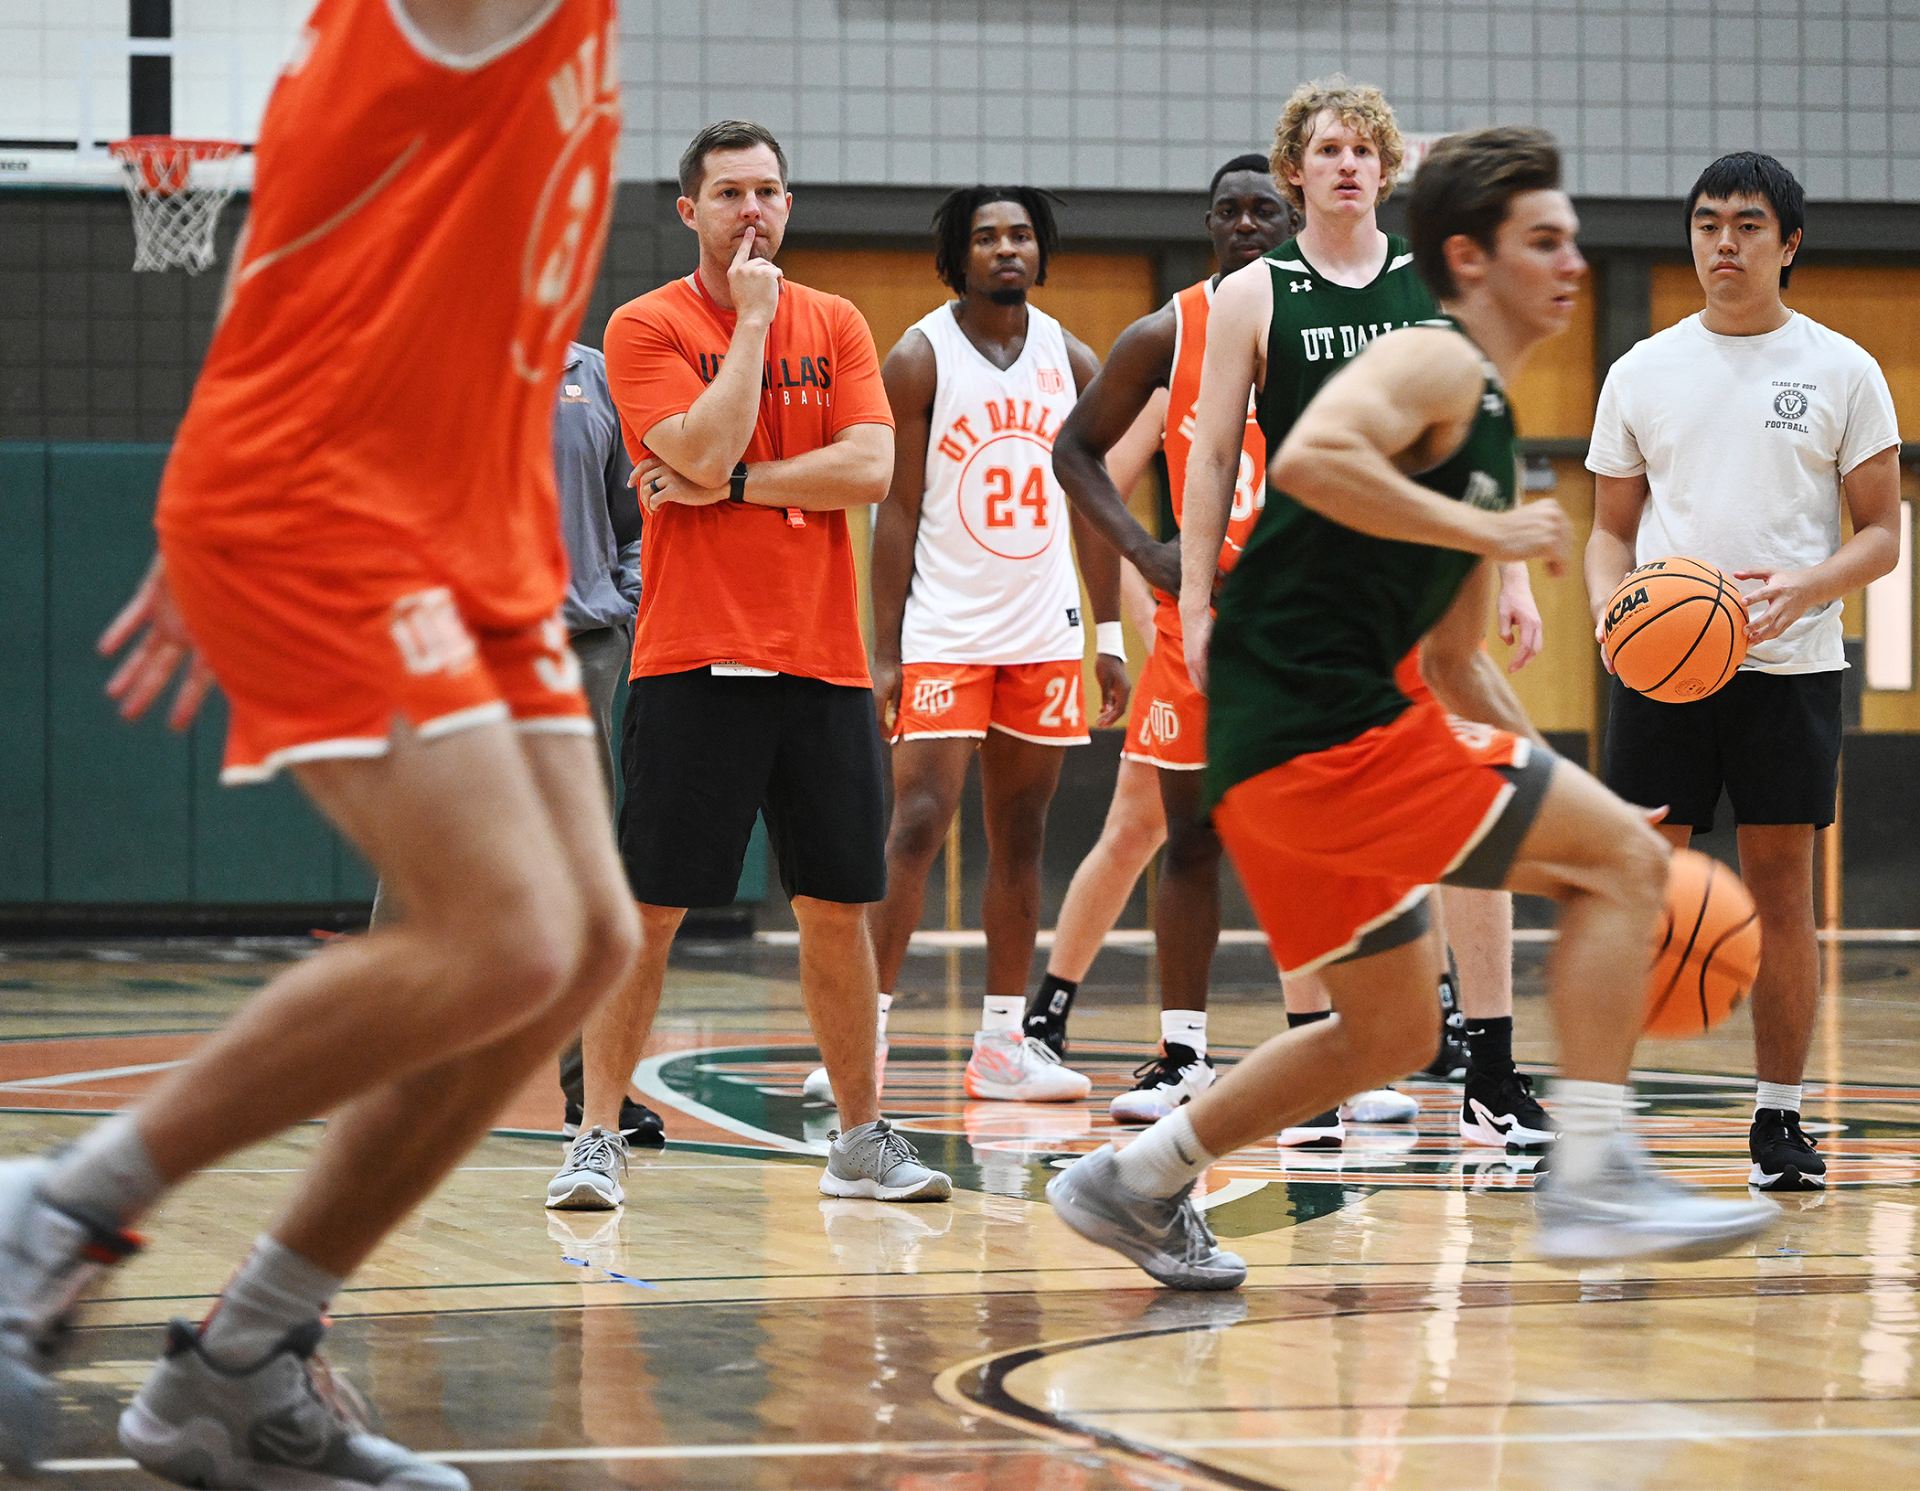 Action shot of UT Dallas basketball team. Coach Jared Flemming in orange shirt and dark green shorts holds finger to his lips as he observes.